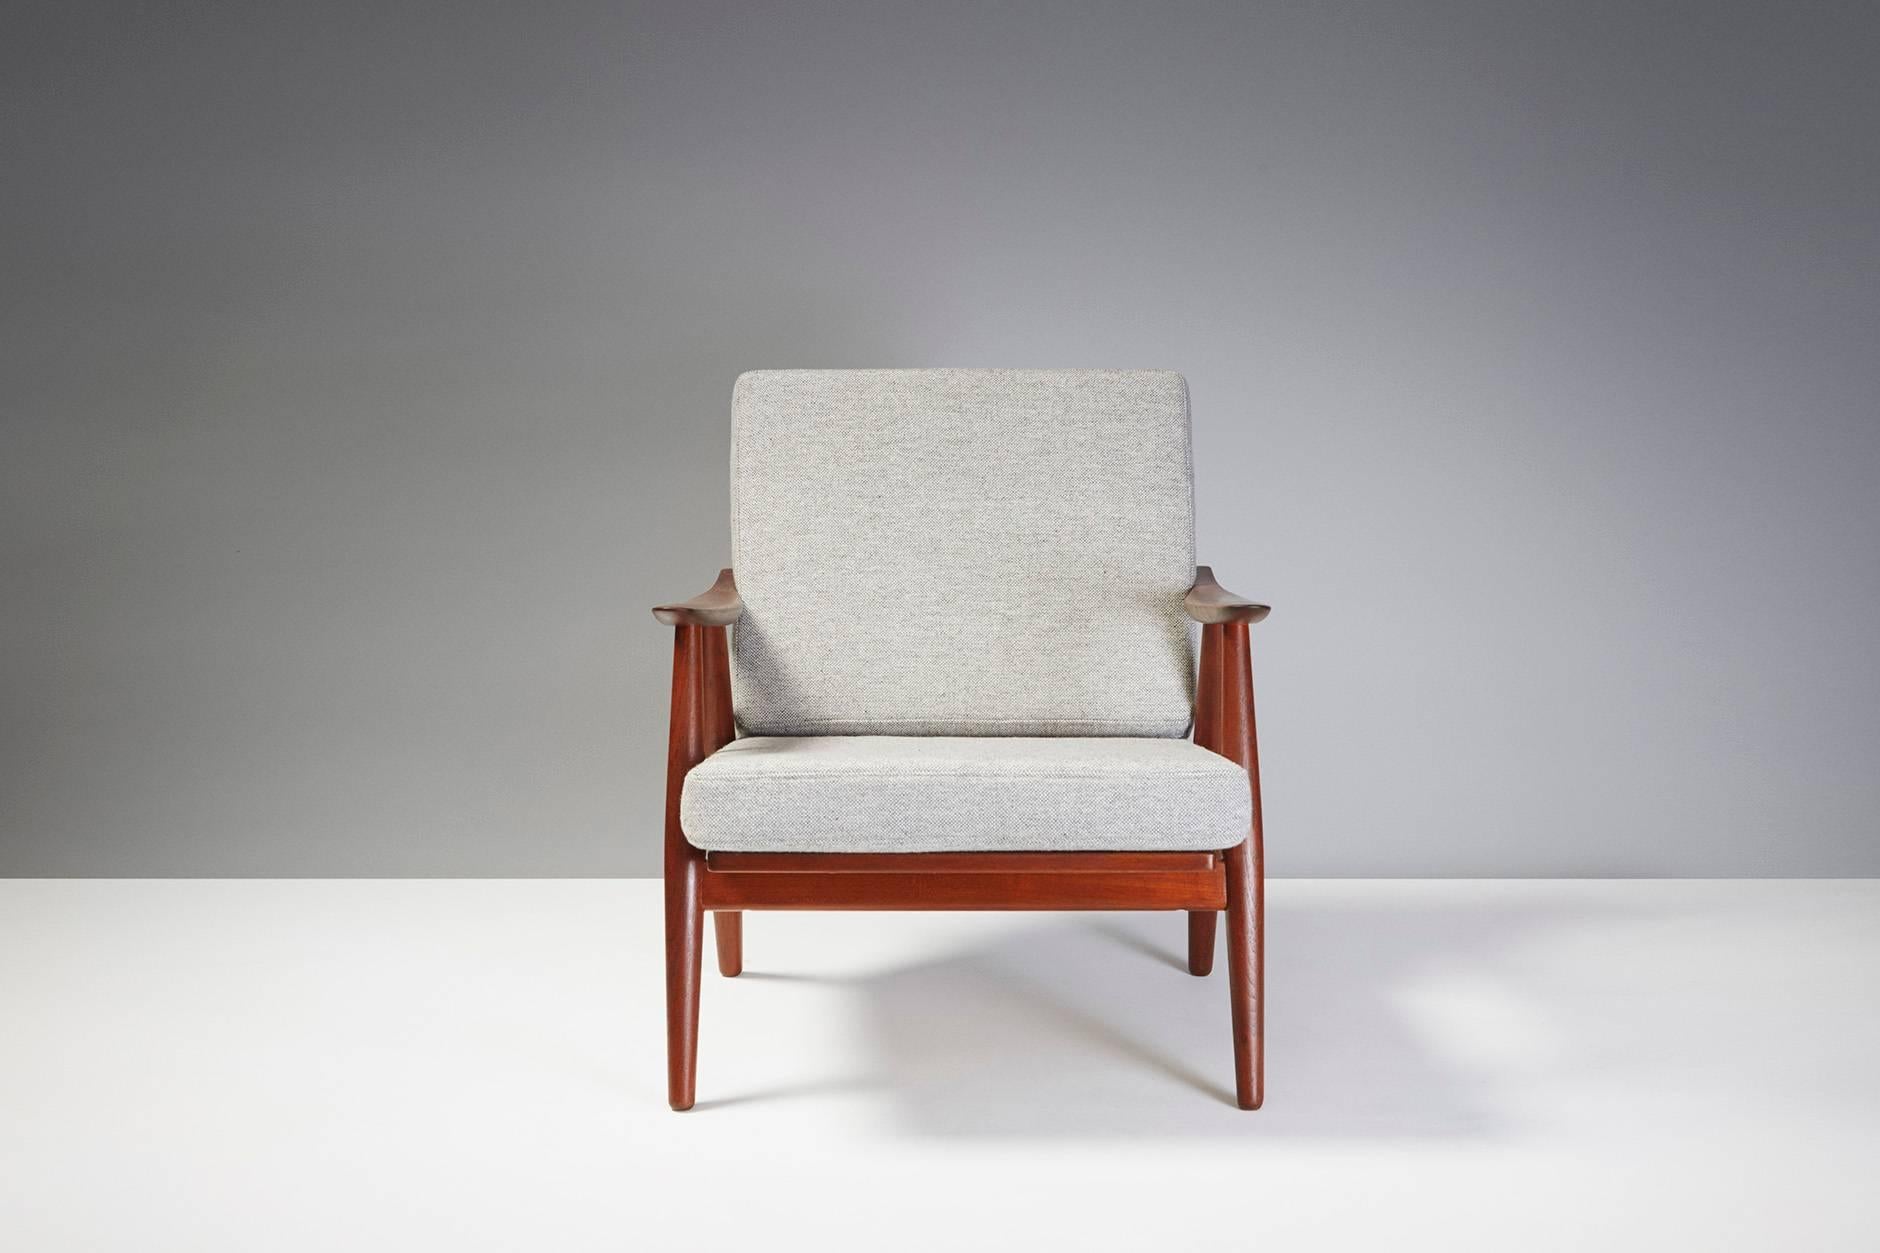 Hans J. Wegner

GE-270 Lounge Chairs, 1956

Produced by GETAMA Gedsted, Denmark. Teak frame with brass fittings. New cushions upholstered in Kvadrat Hallingdal fabric.